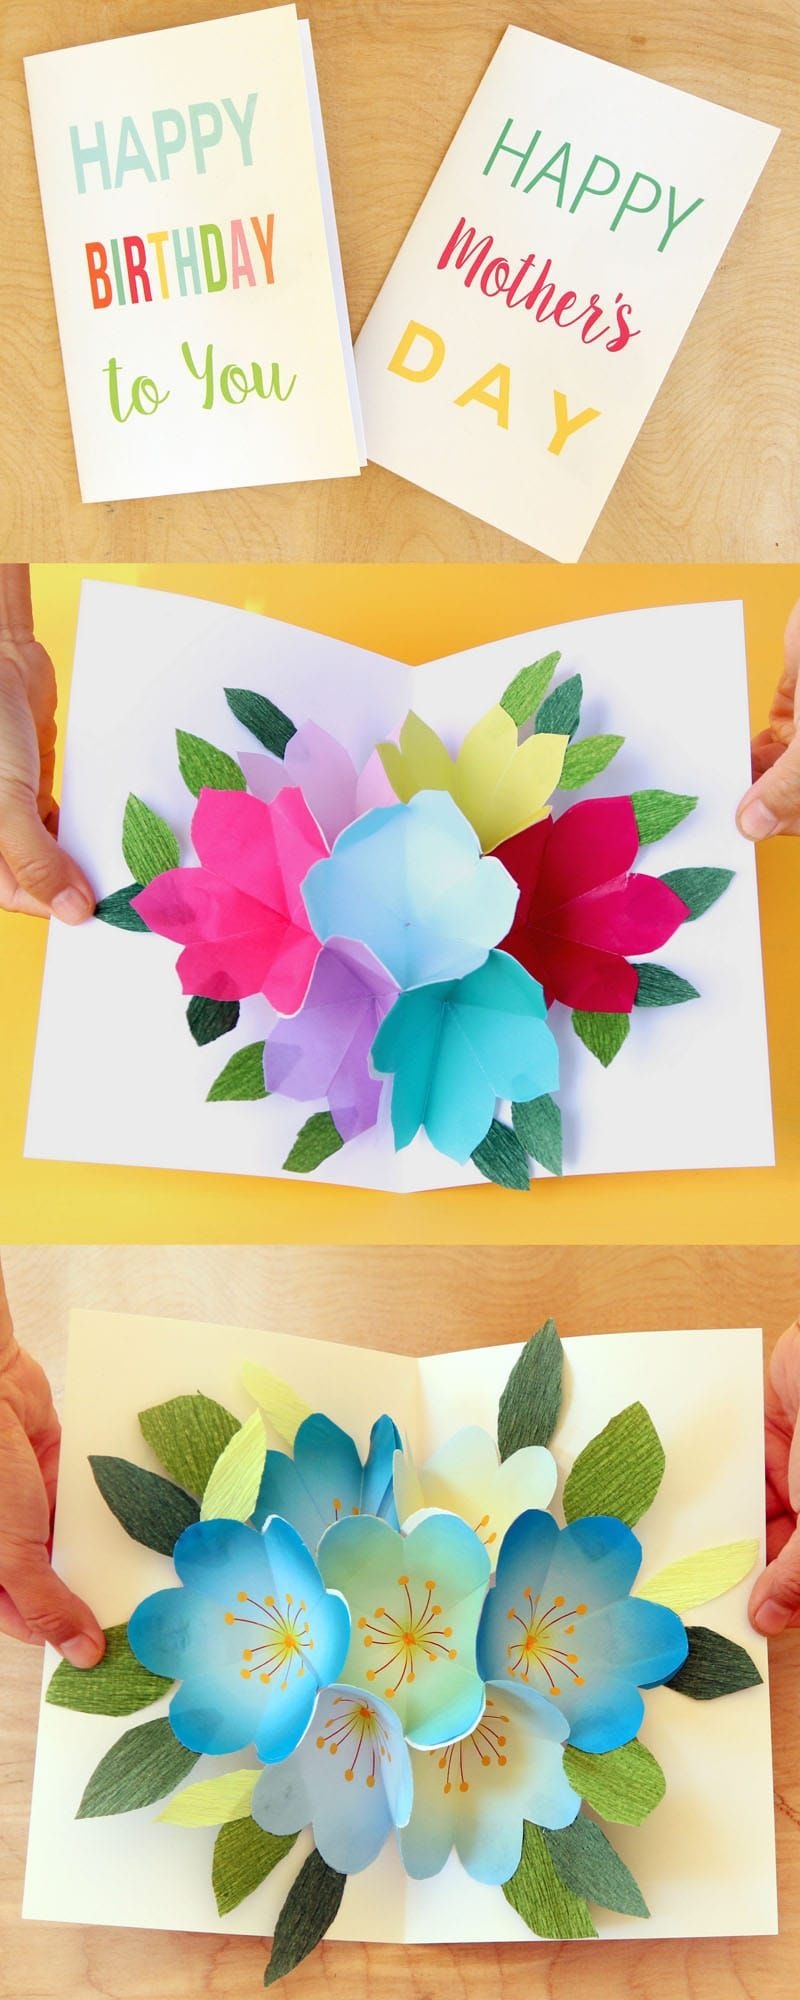 Free Printable Happy Birthday Card With Pop Up Bouquet | Printables - Free Printable Birthday Pop Up Card Templates